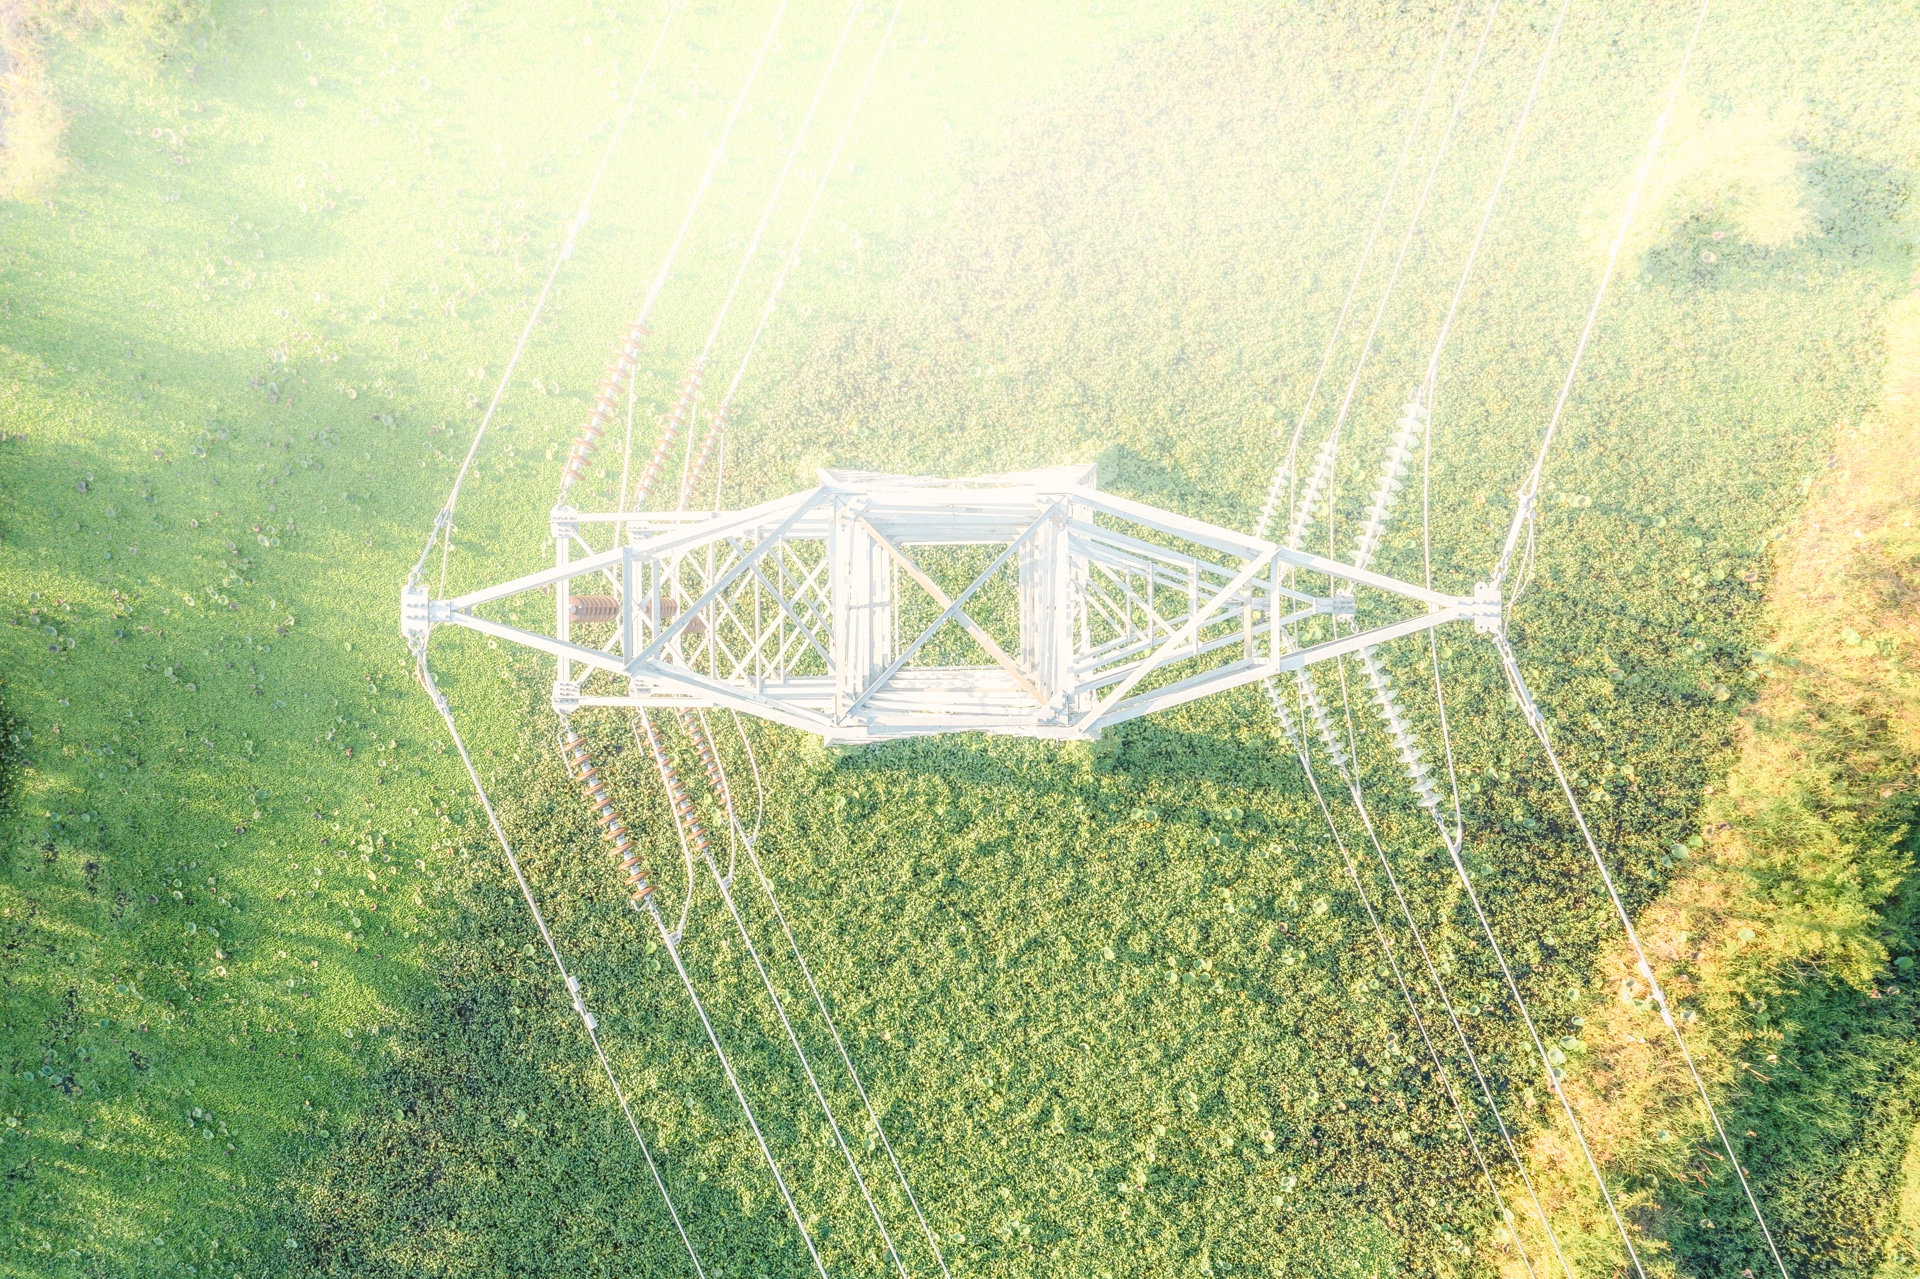 Transmission tower or electricity pylon in aerial view